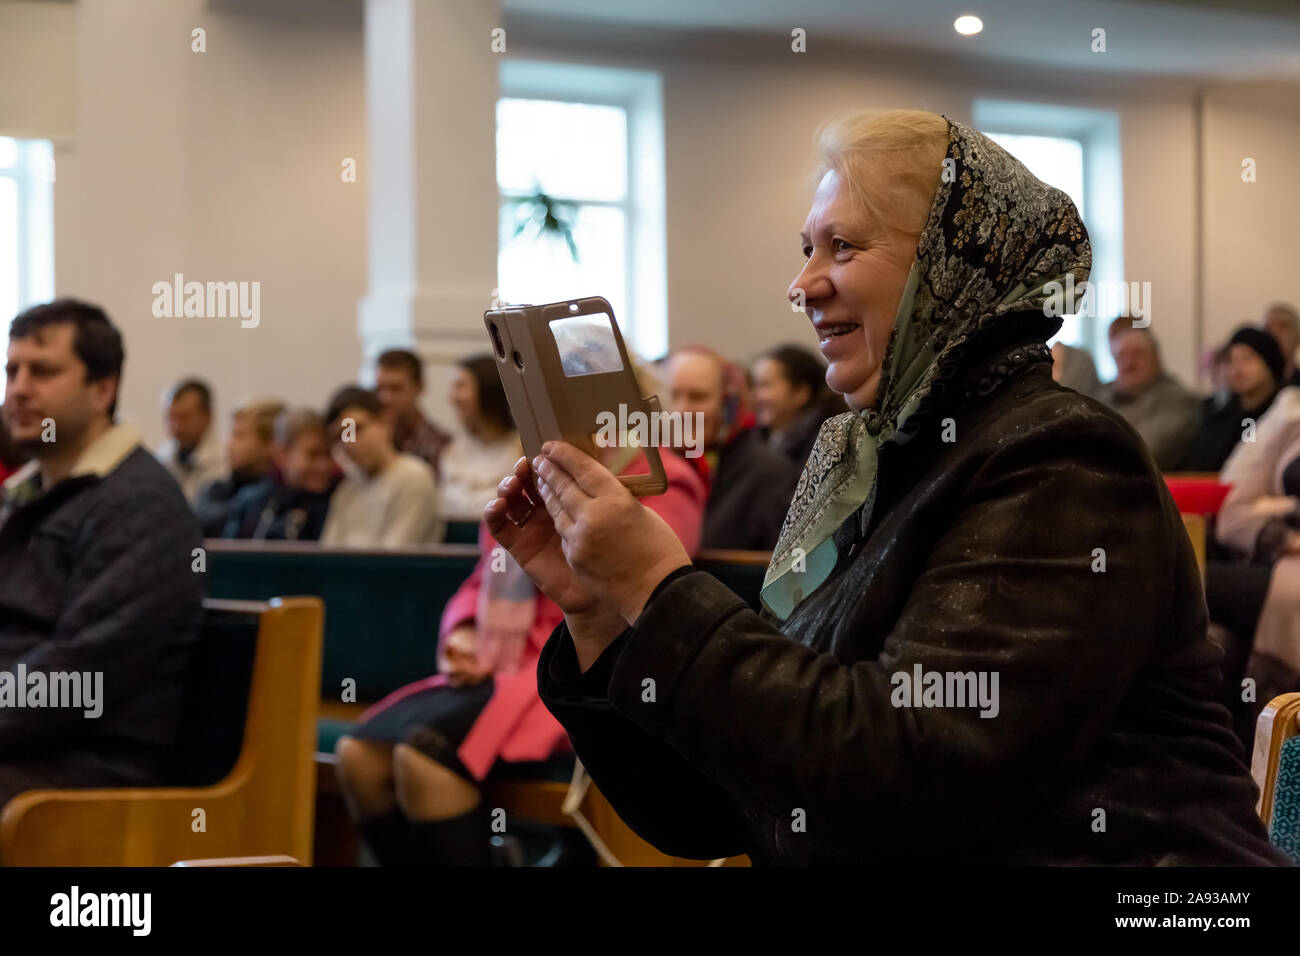 KOROSTEN - NOV, 10, 2019: An elderly woman in a scarf smiles and takes off a concert on the phone Stock Photo